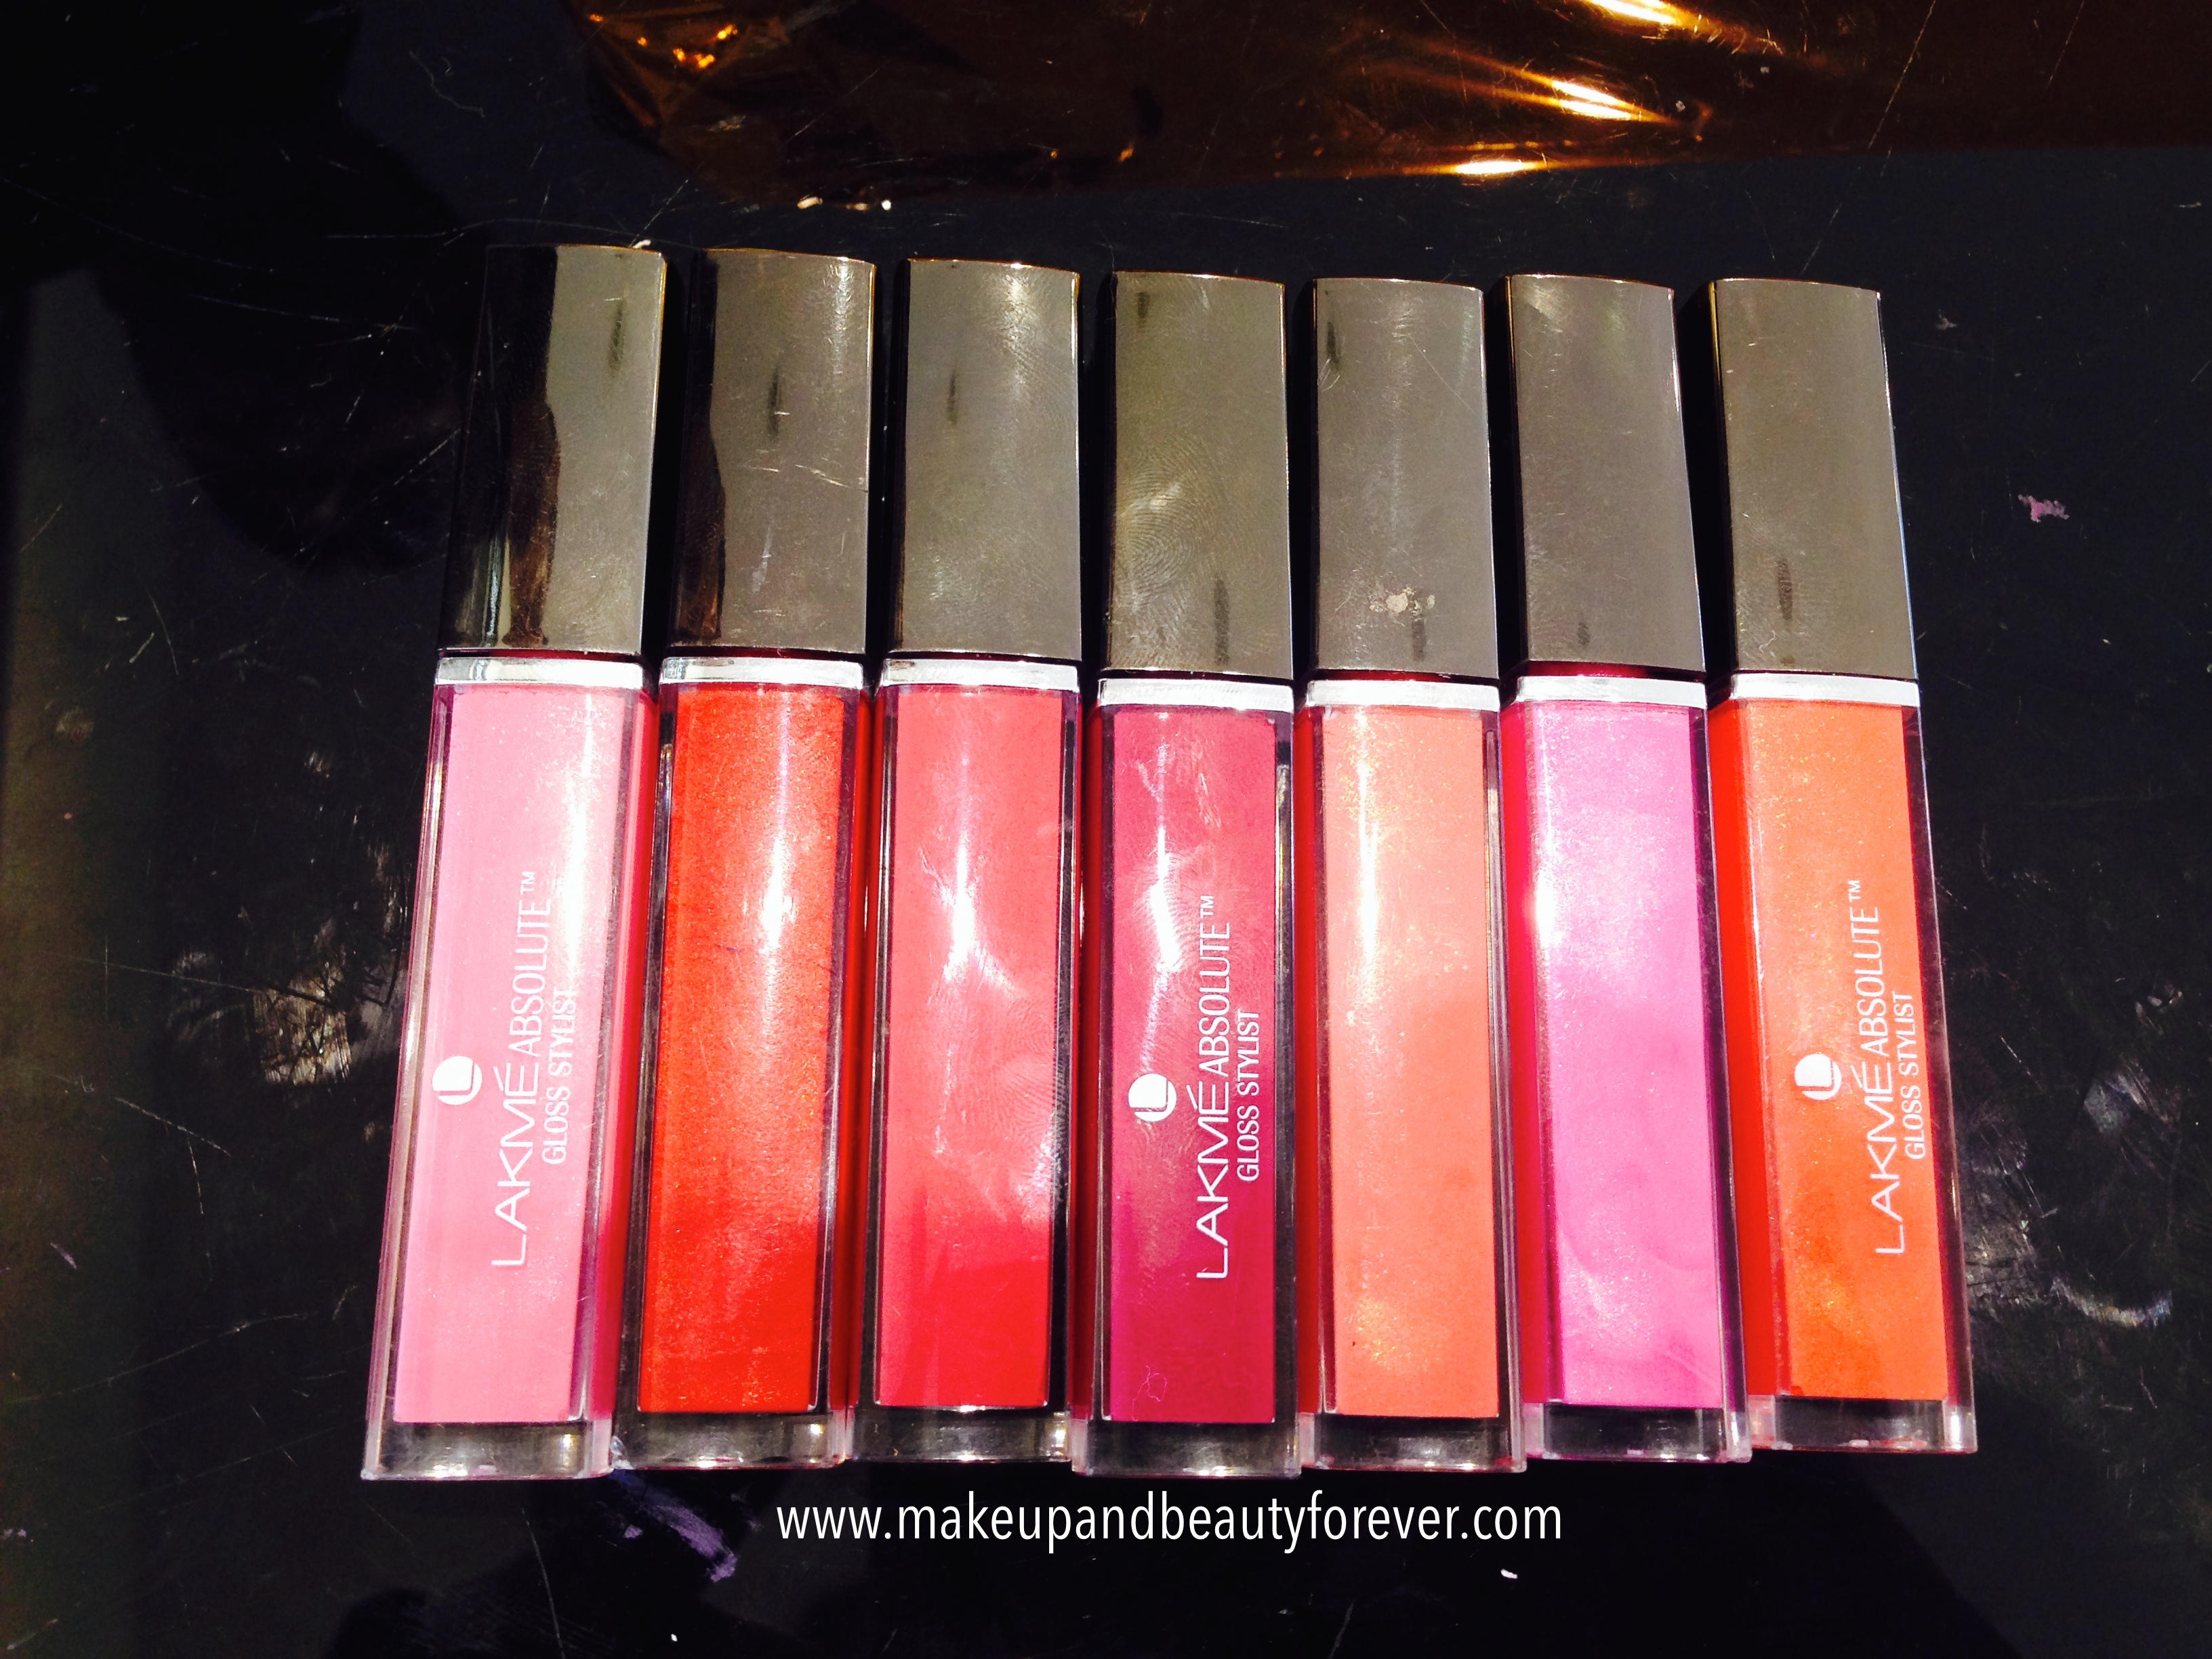 All Lakme Absolute Gloss Stylist Lip Gloss Review, Shades 